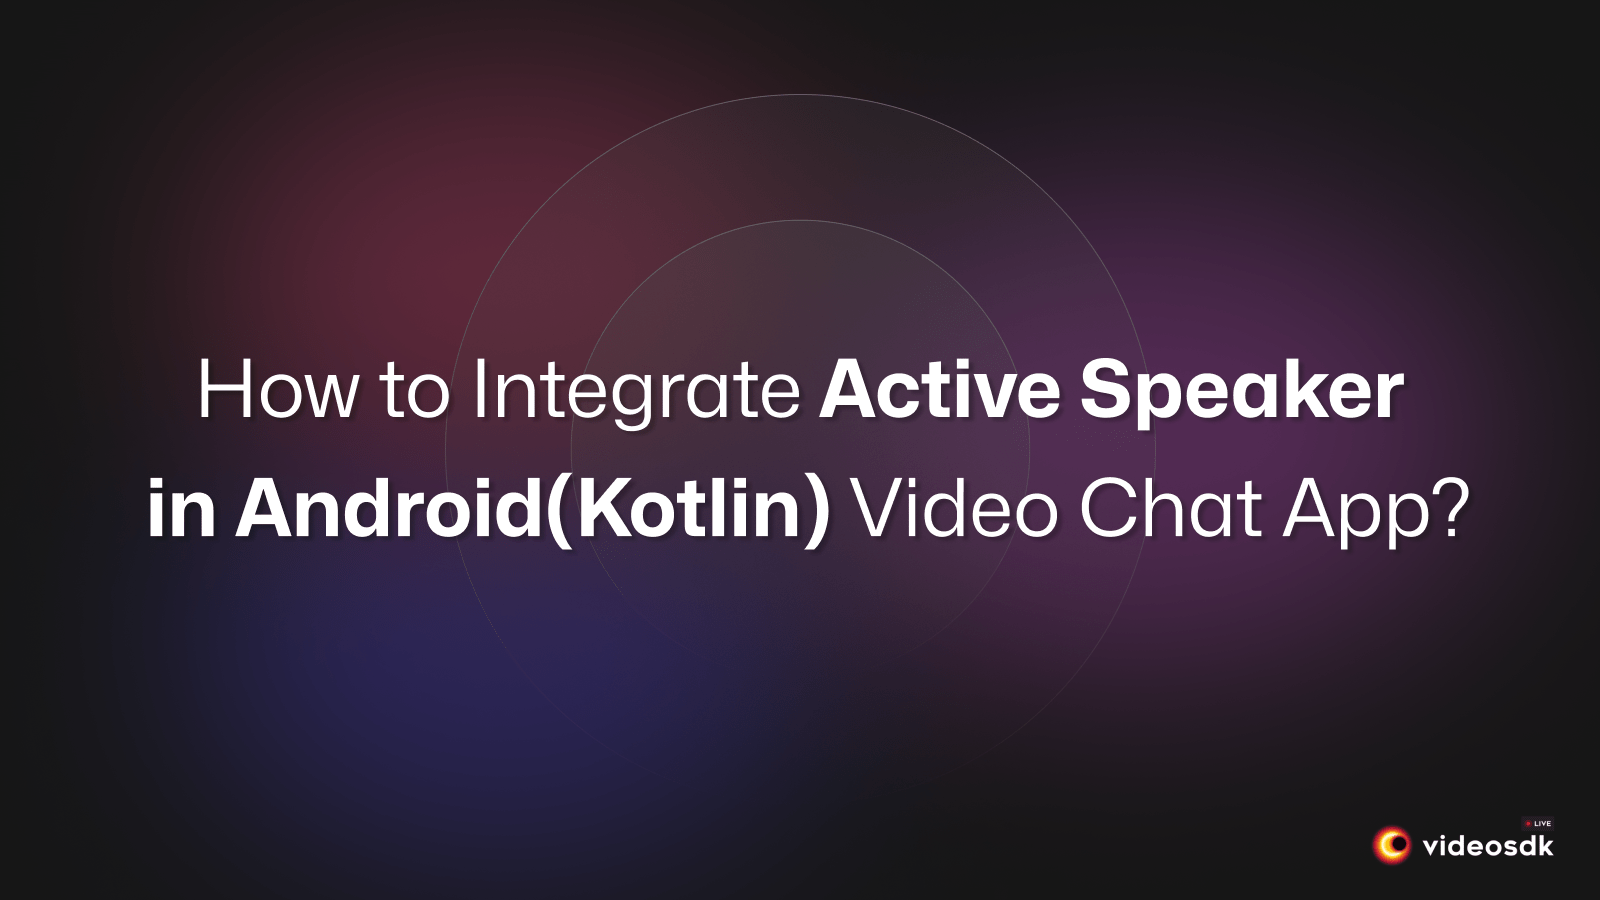 How to Integrate Active Speaker in Android(Kotlin) Video Chat App?